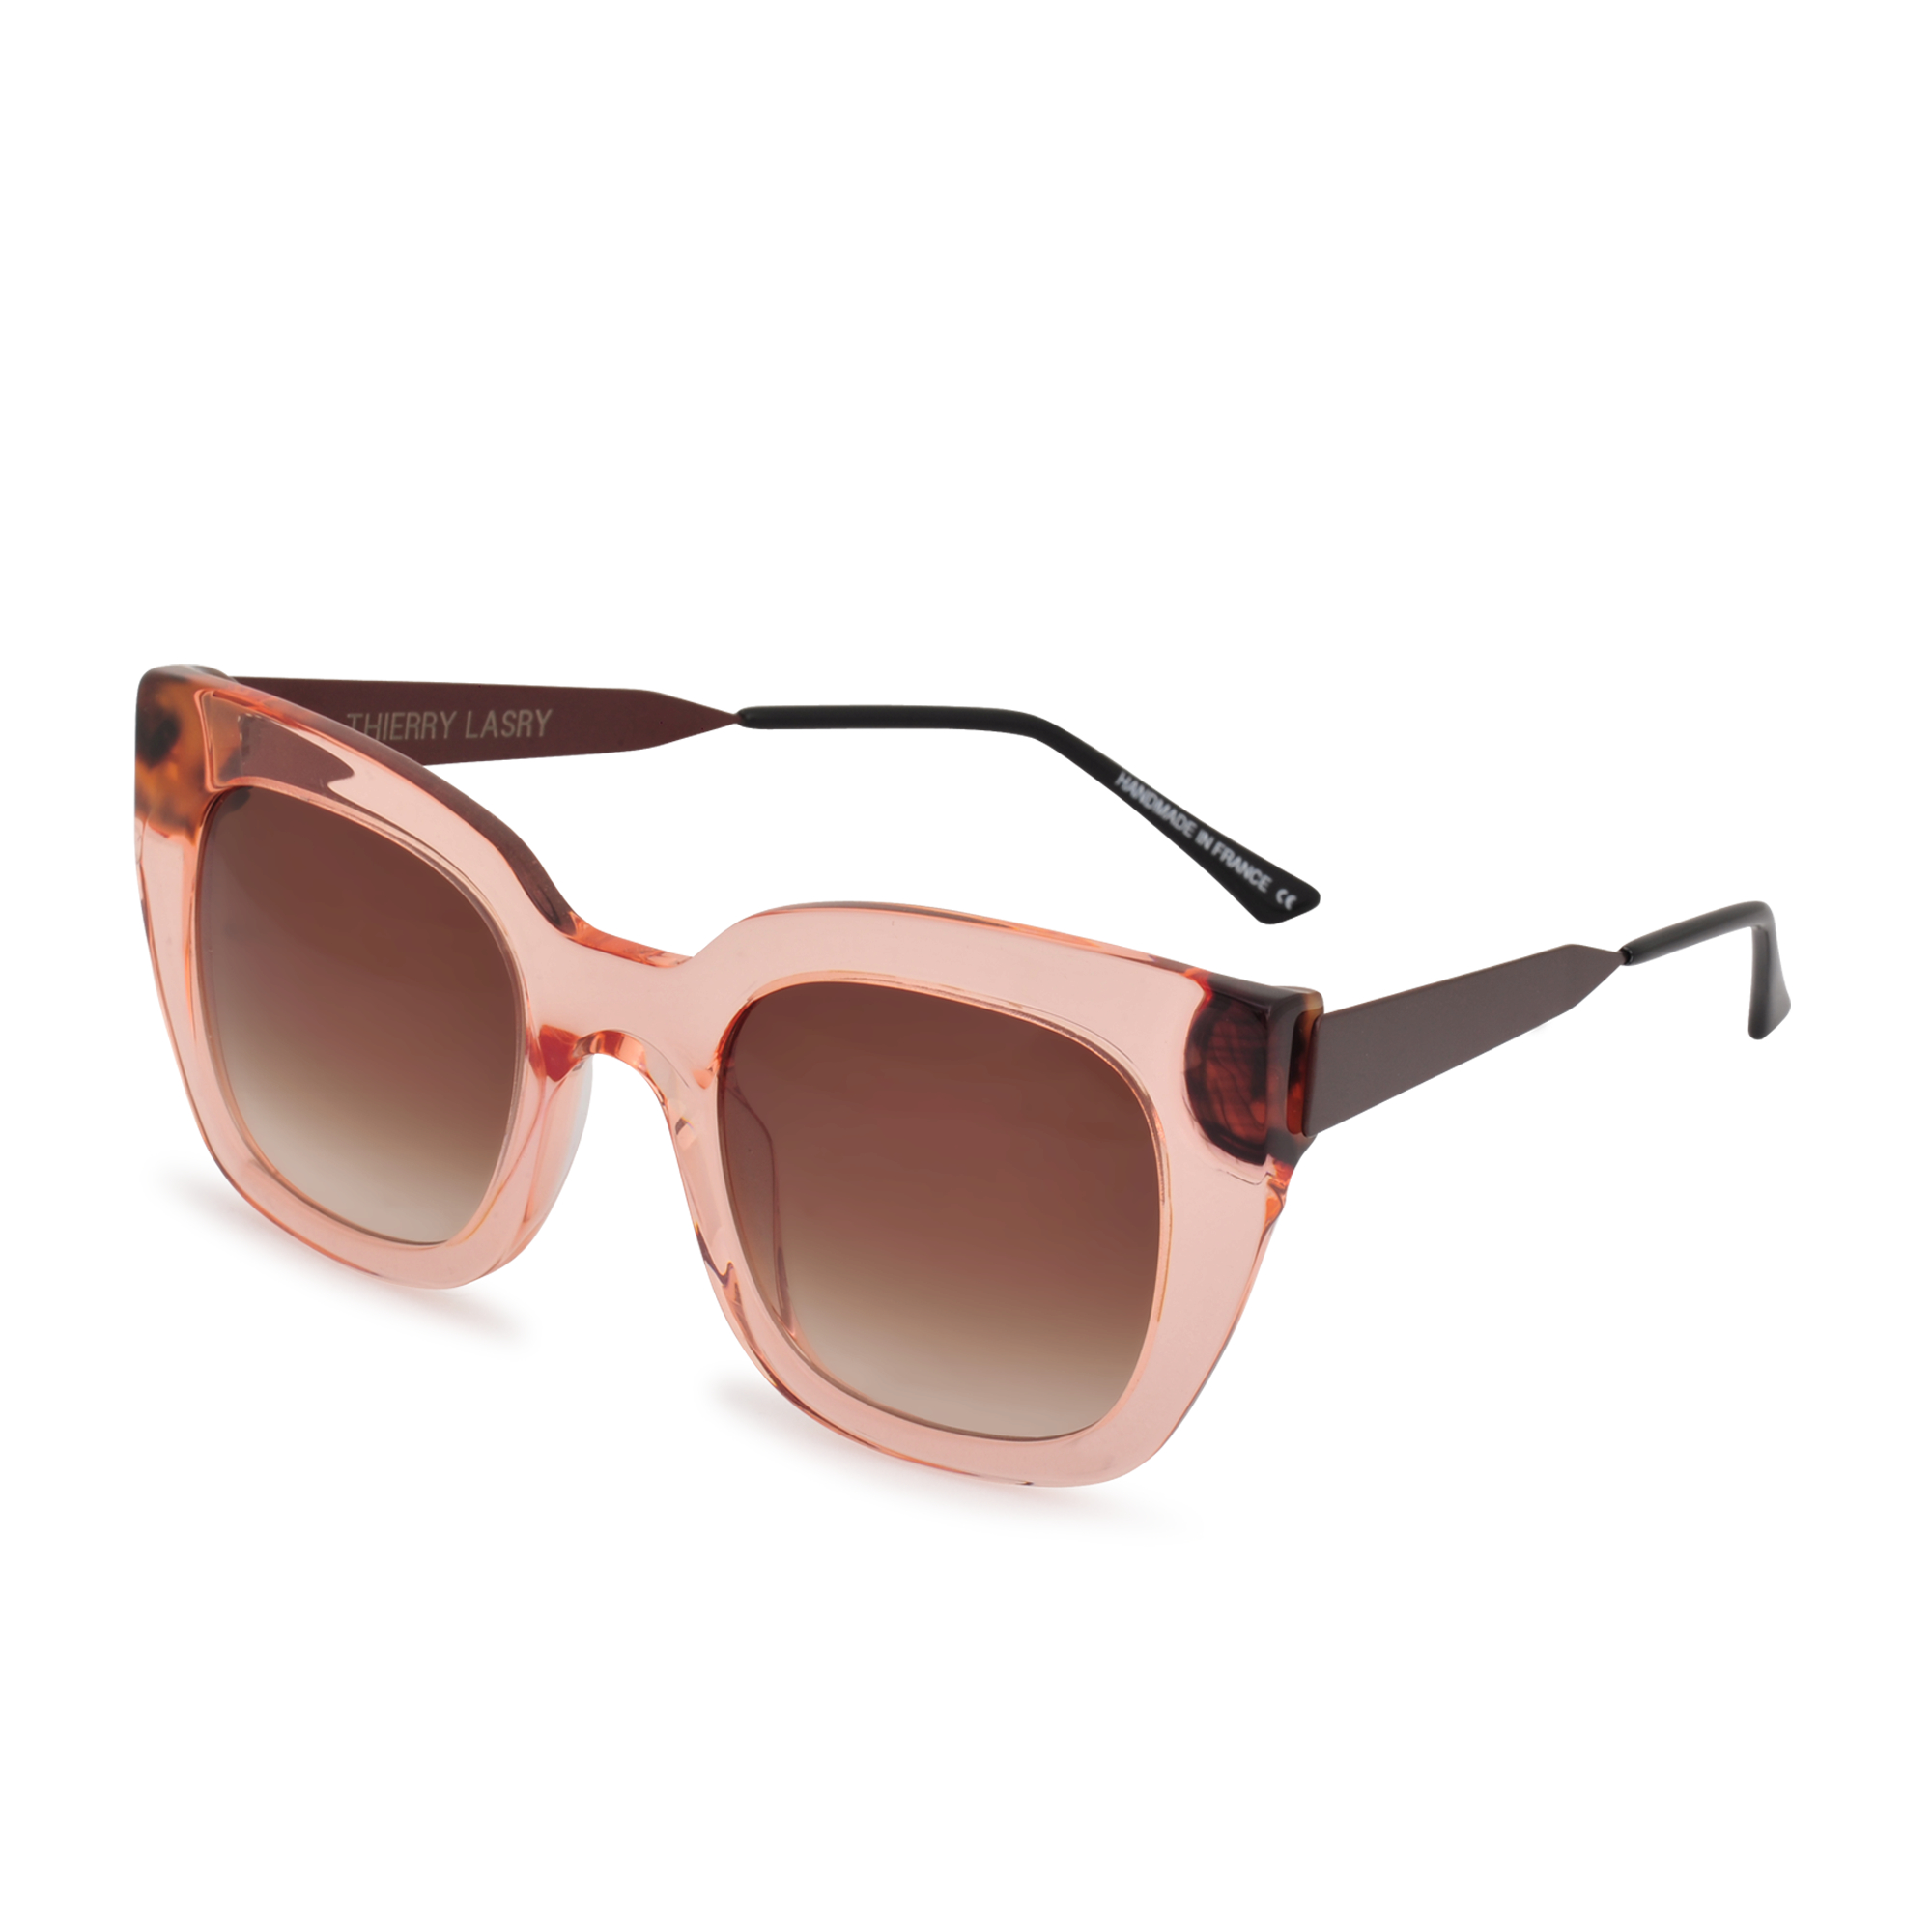 Lyst - Thierry Lasry Swingy 1654 Sunglasses in Pink